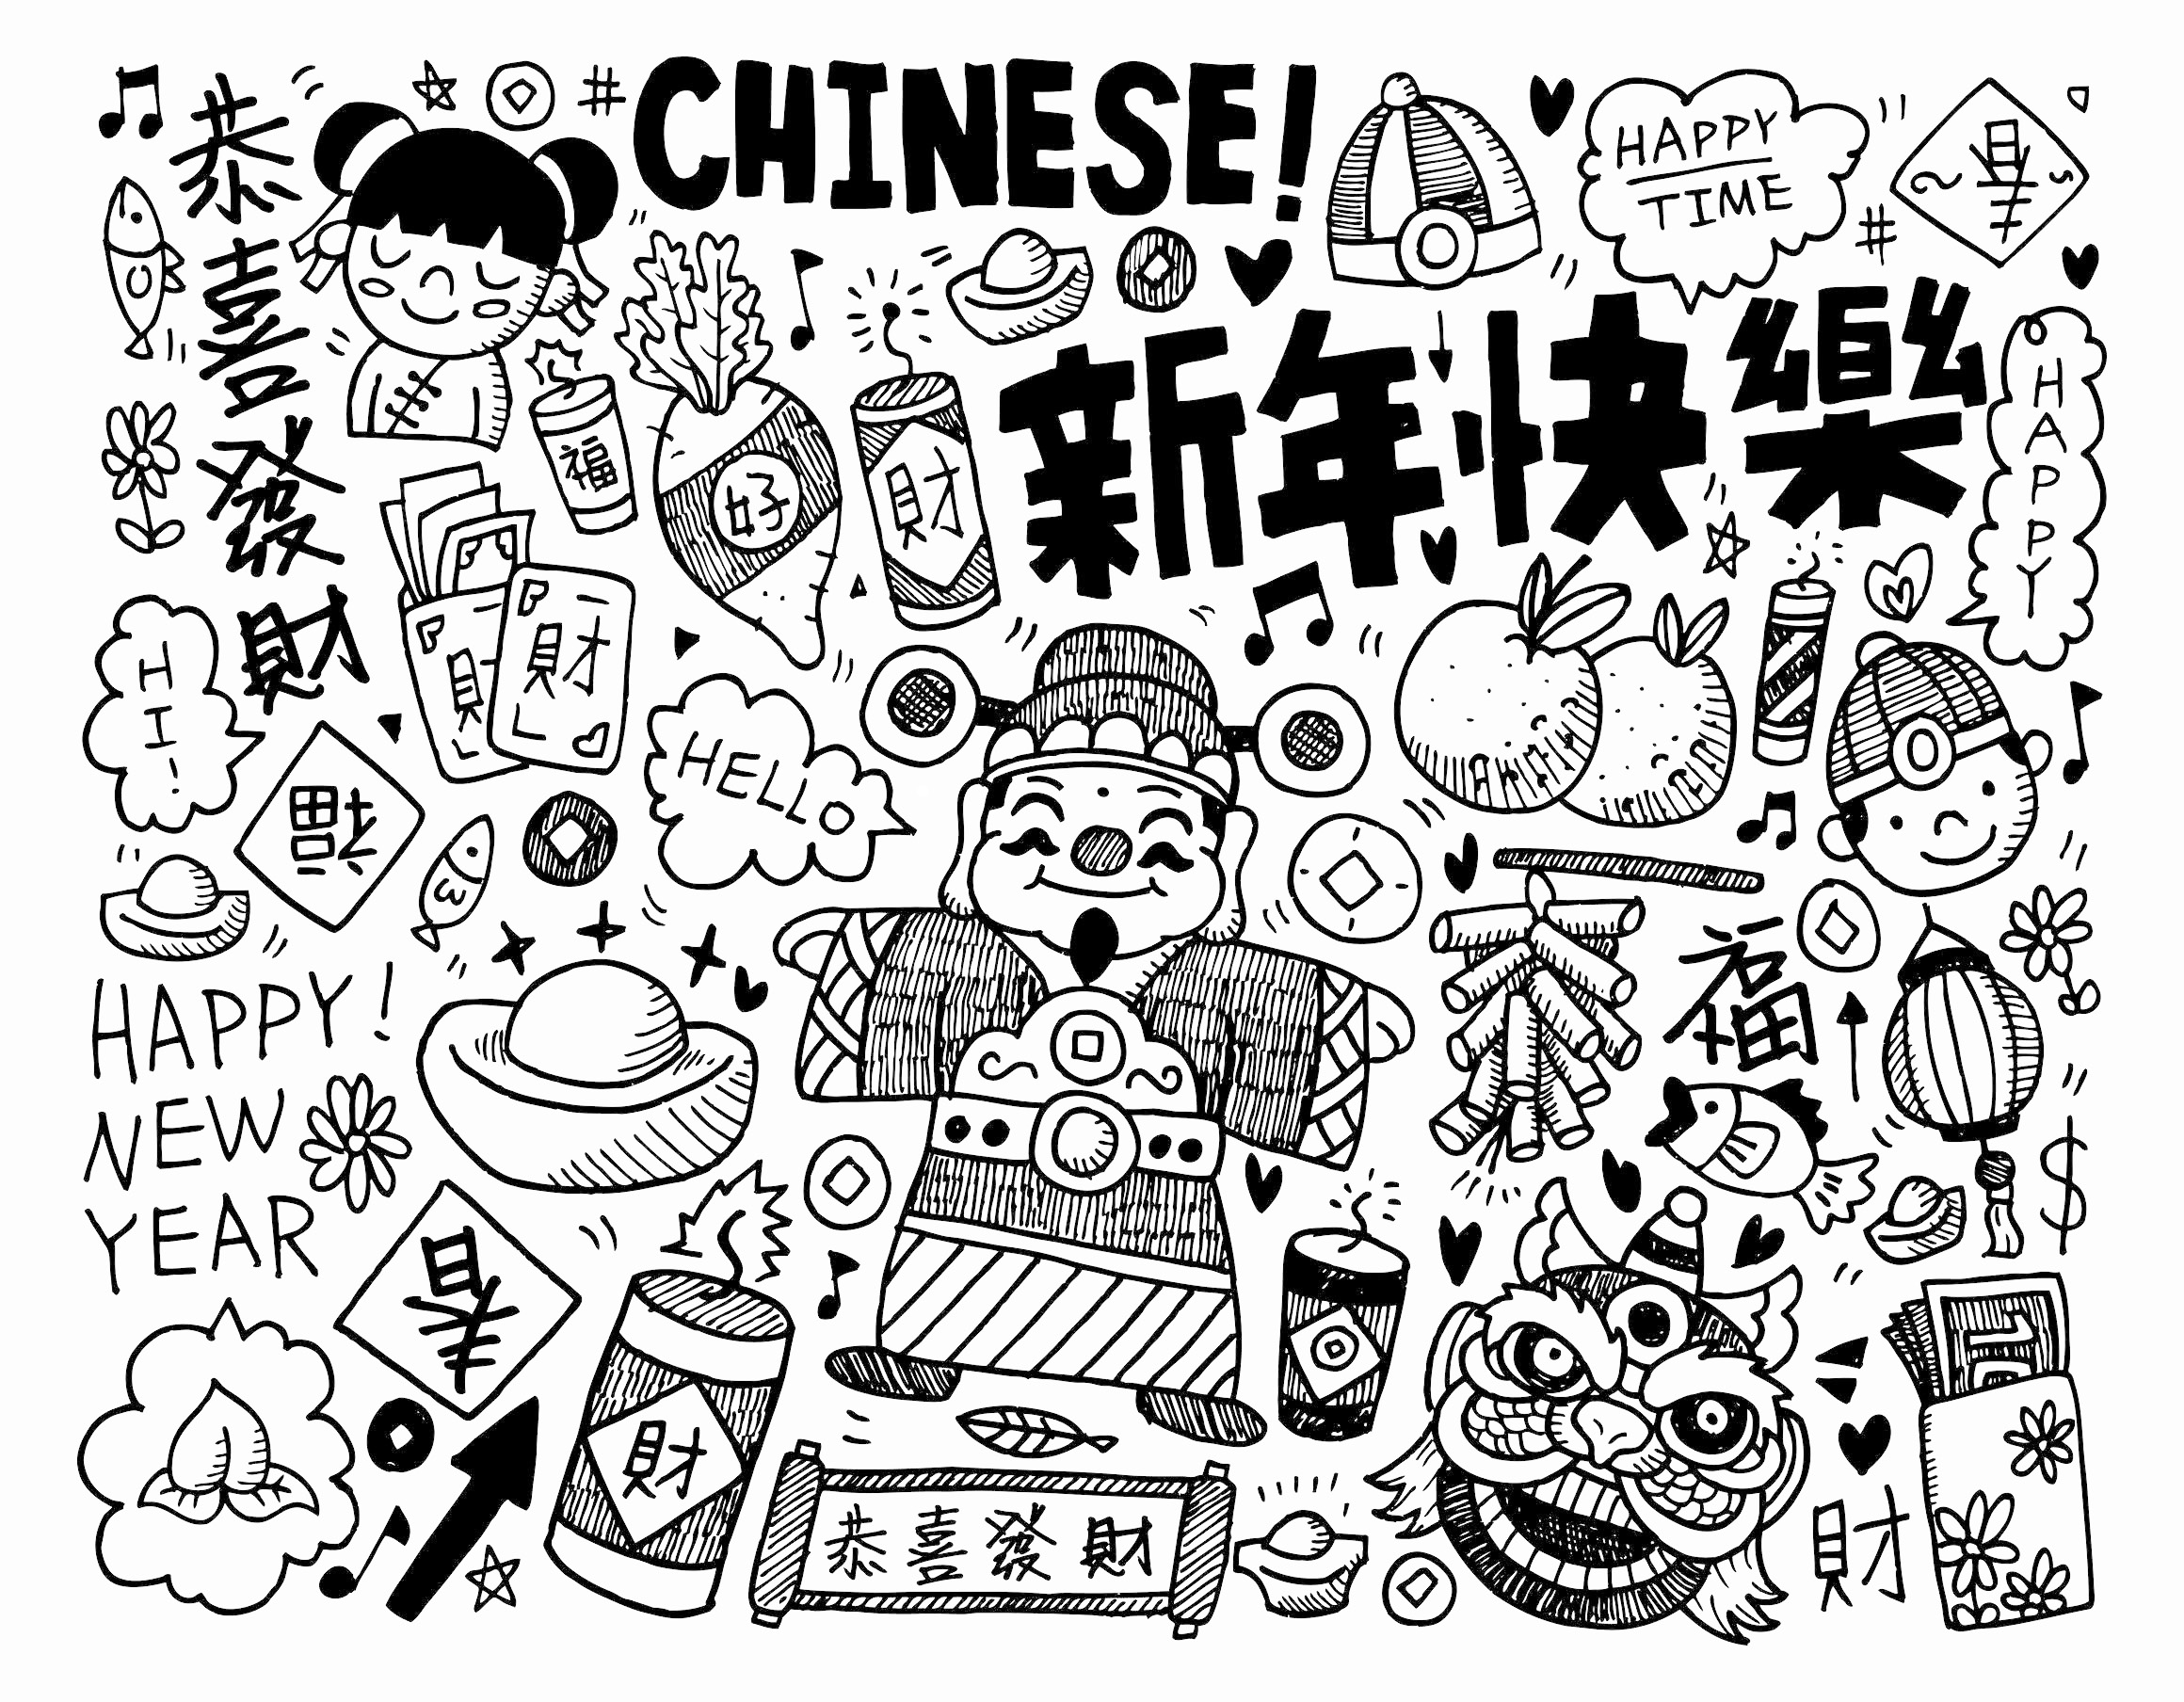 Download Doodle chinese new year - Doodle Art / Doodling Adult Coloring Pages